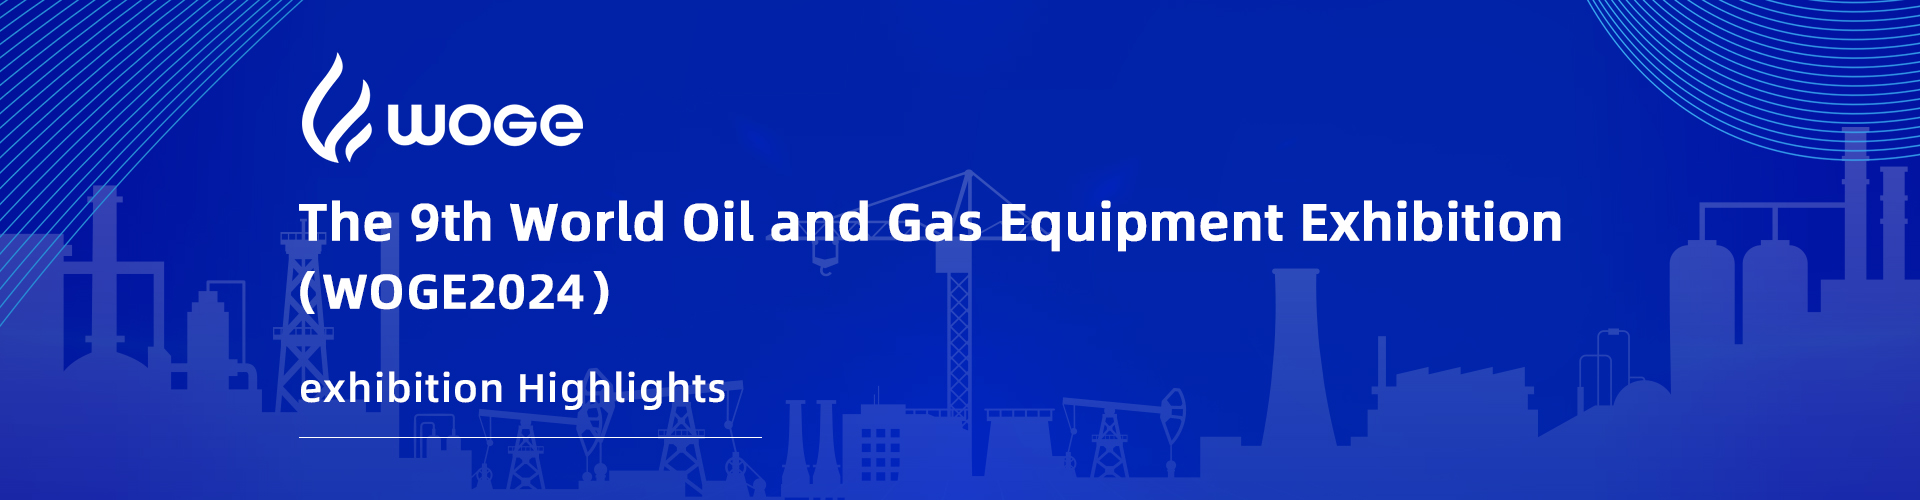 The 9th World Oil and Gas Equipment Exhibition (WOGE2024) HIGHLIGHTS